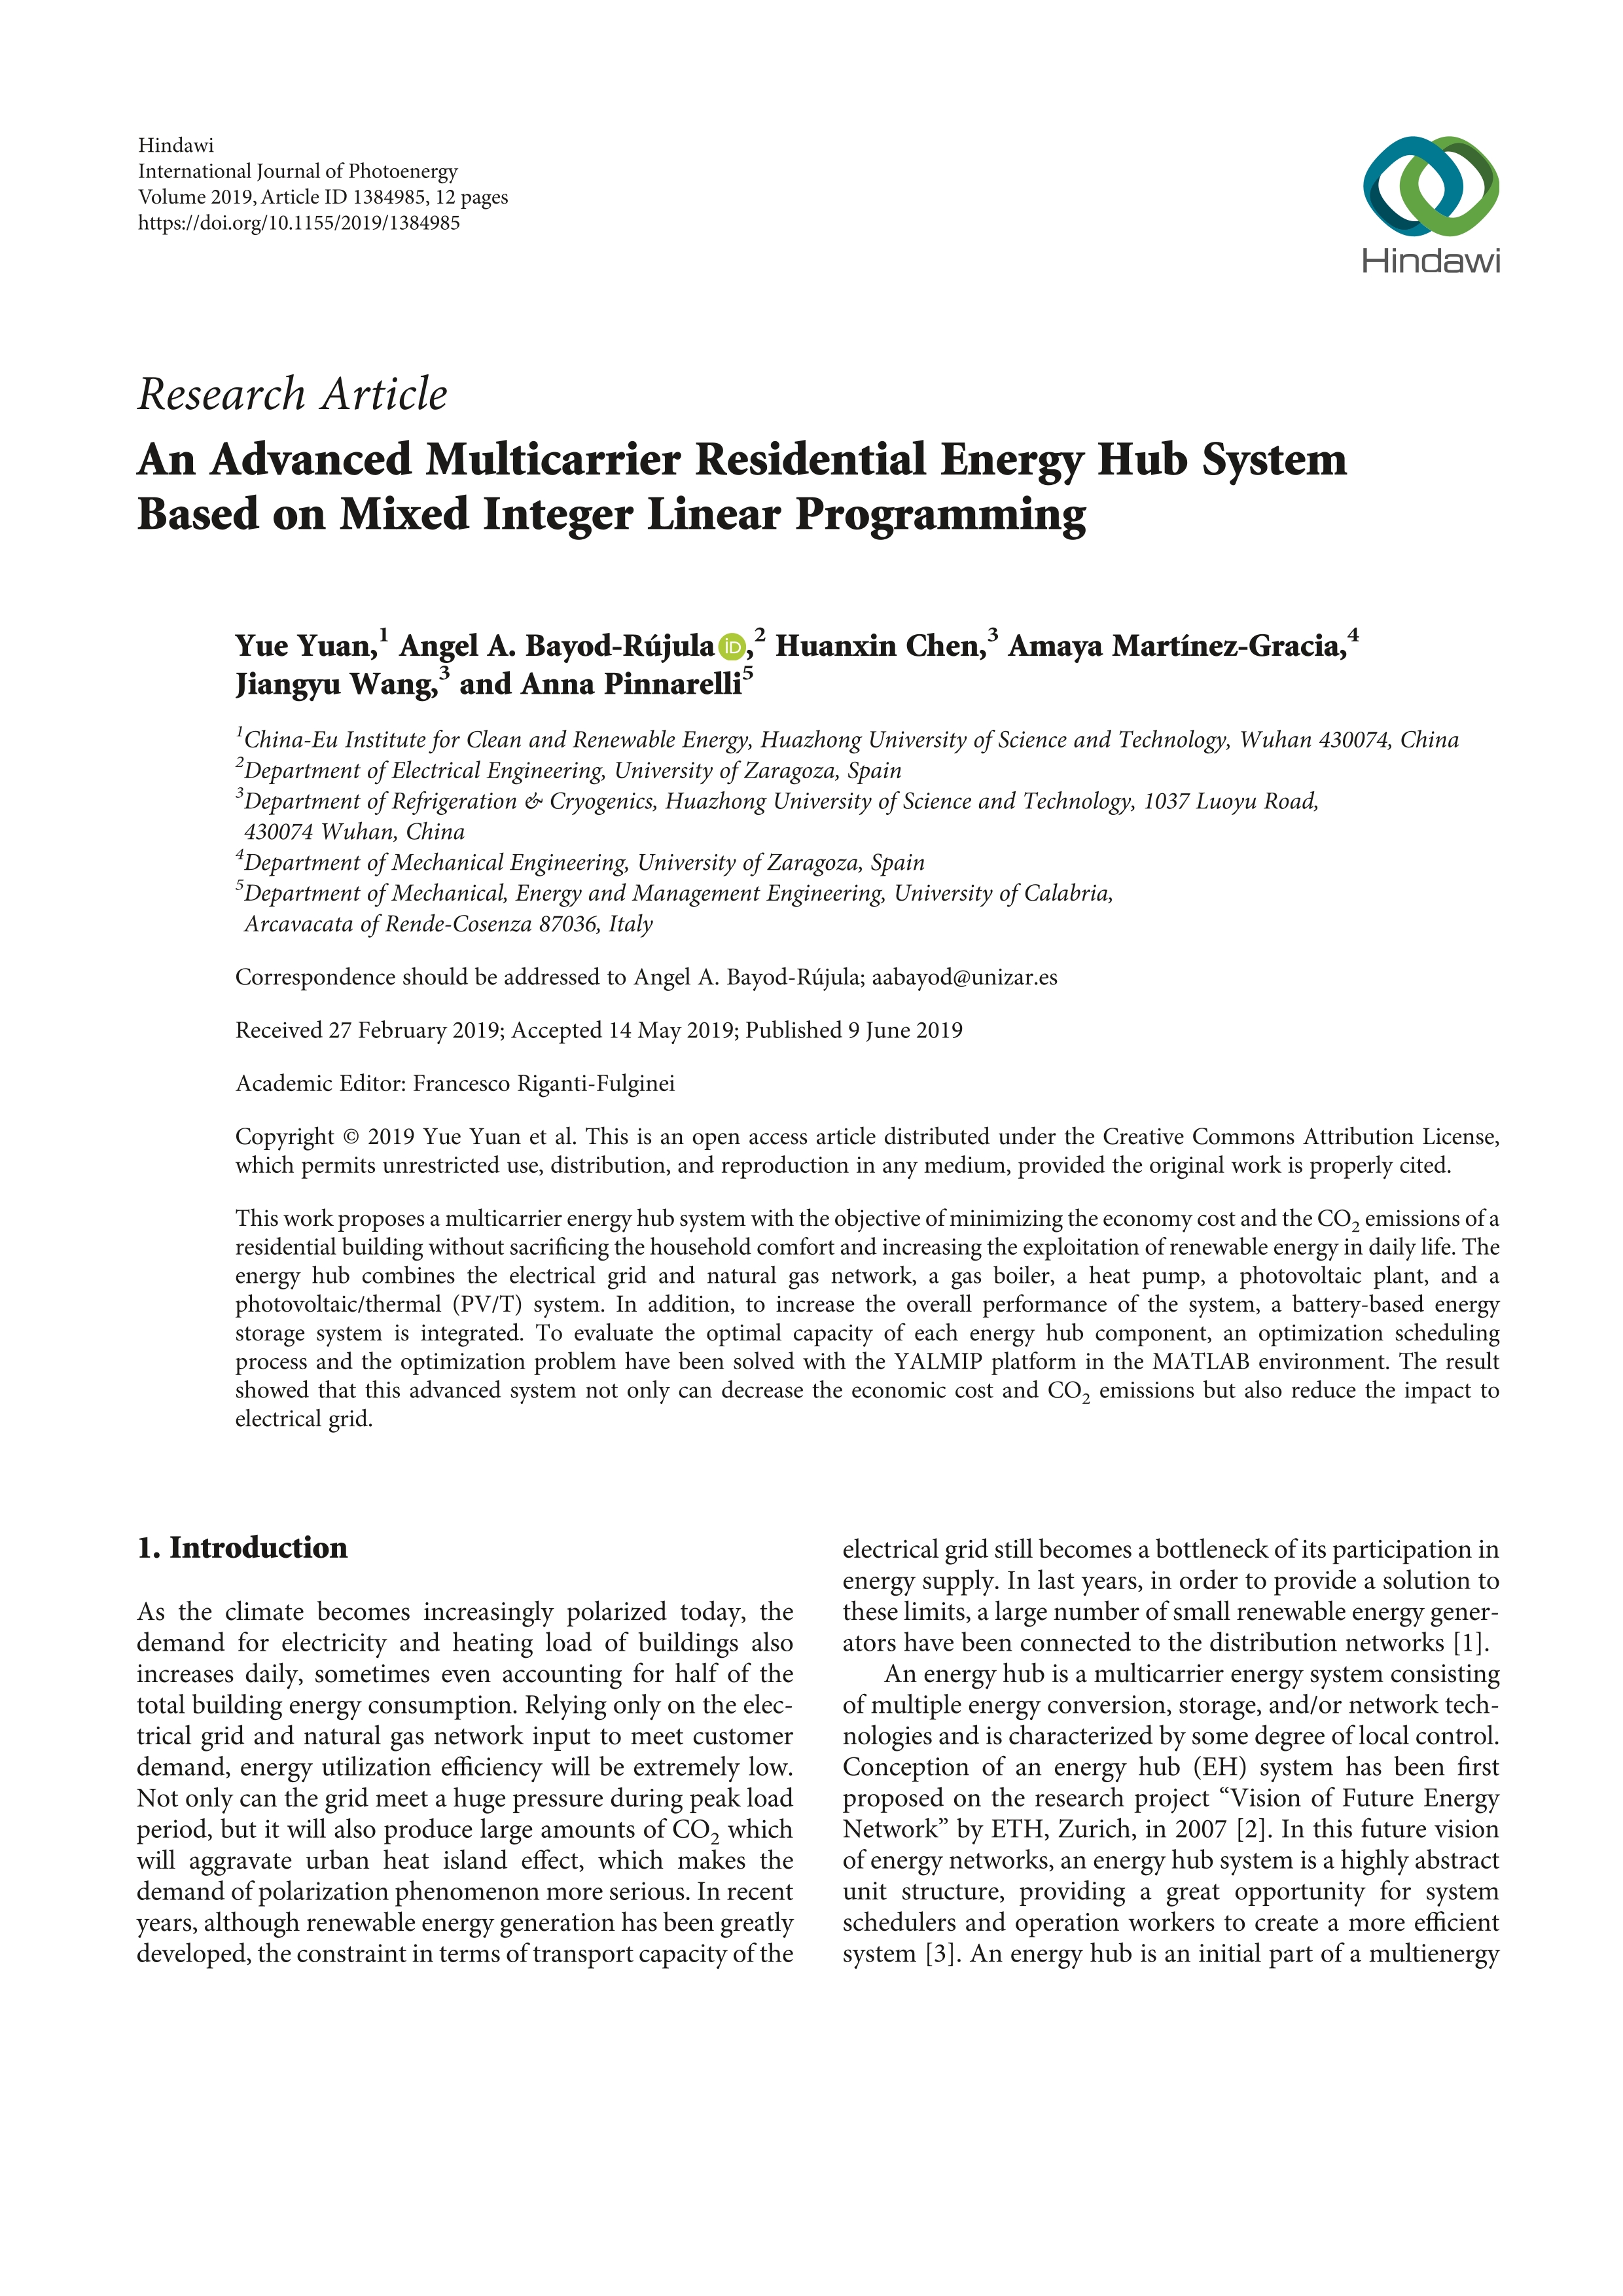 An advanced multicarrier residential energy hub system based on mixed integer linear programming